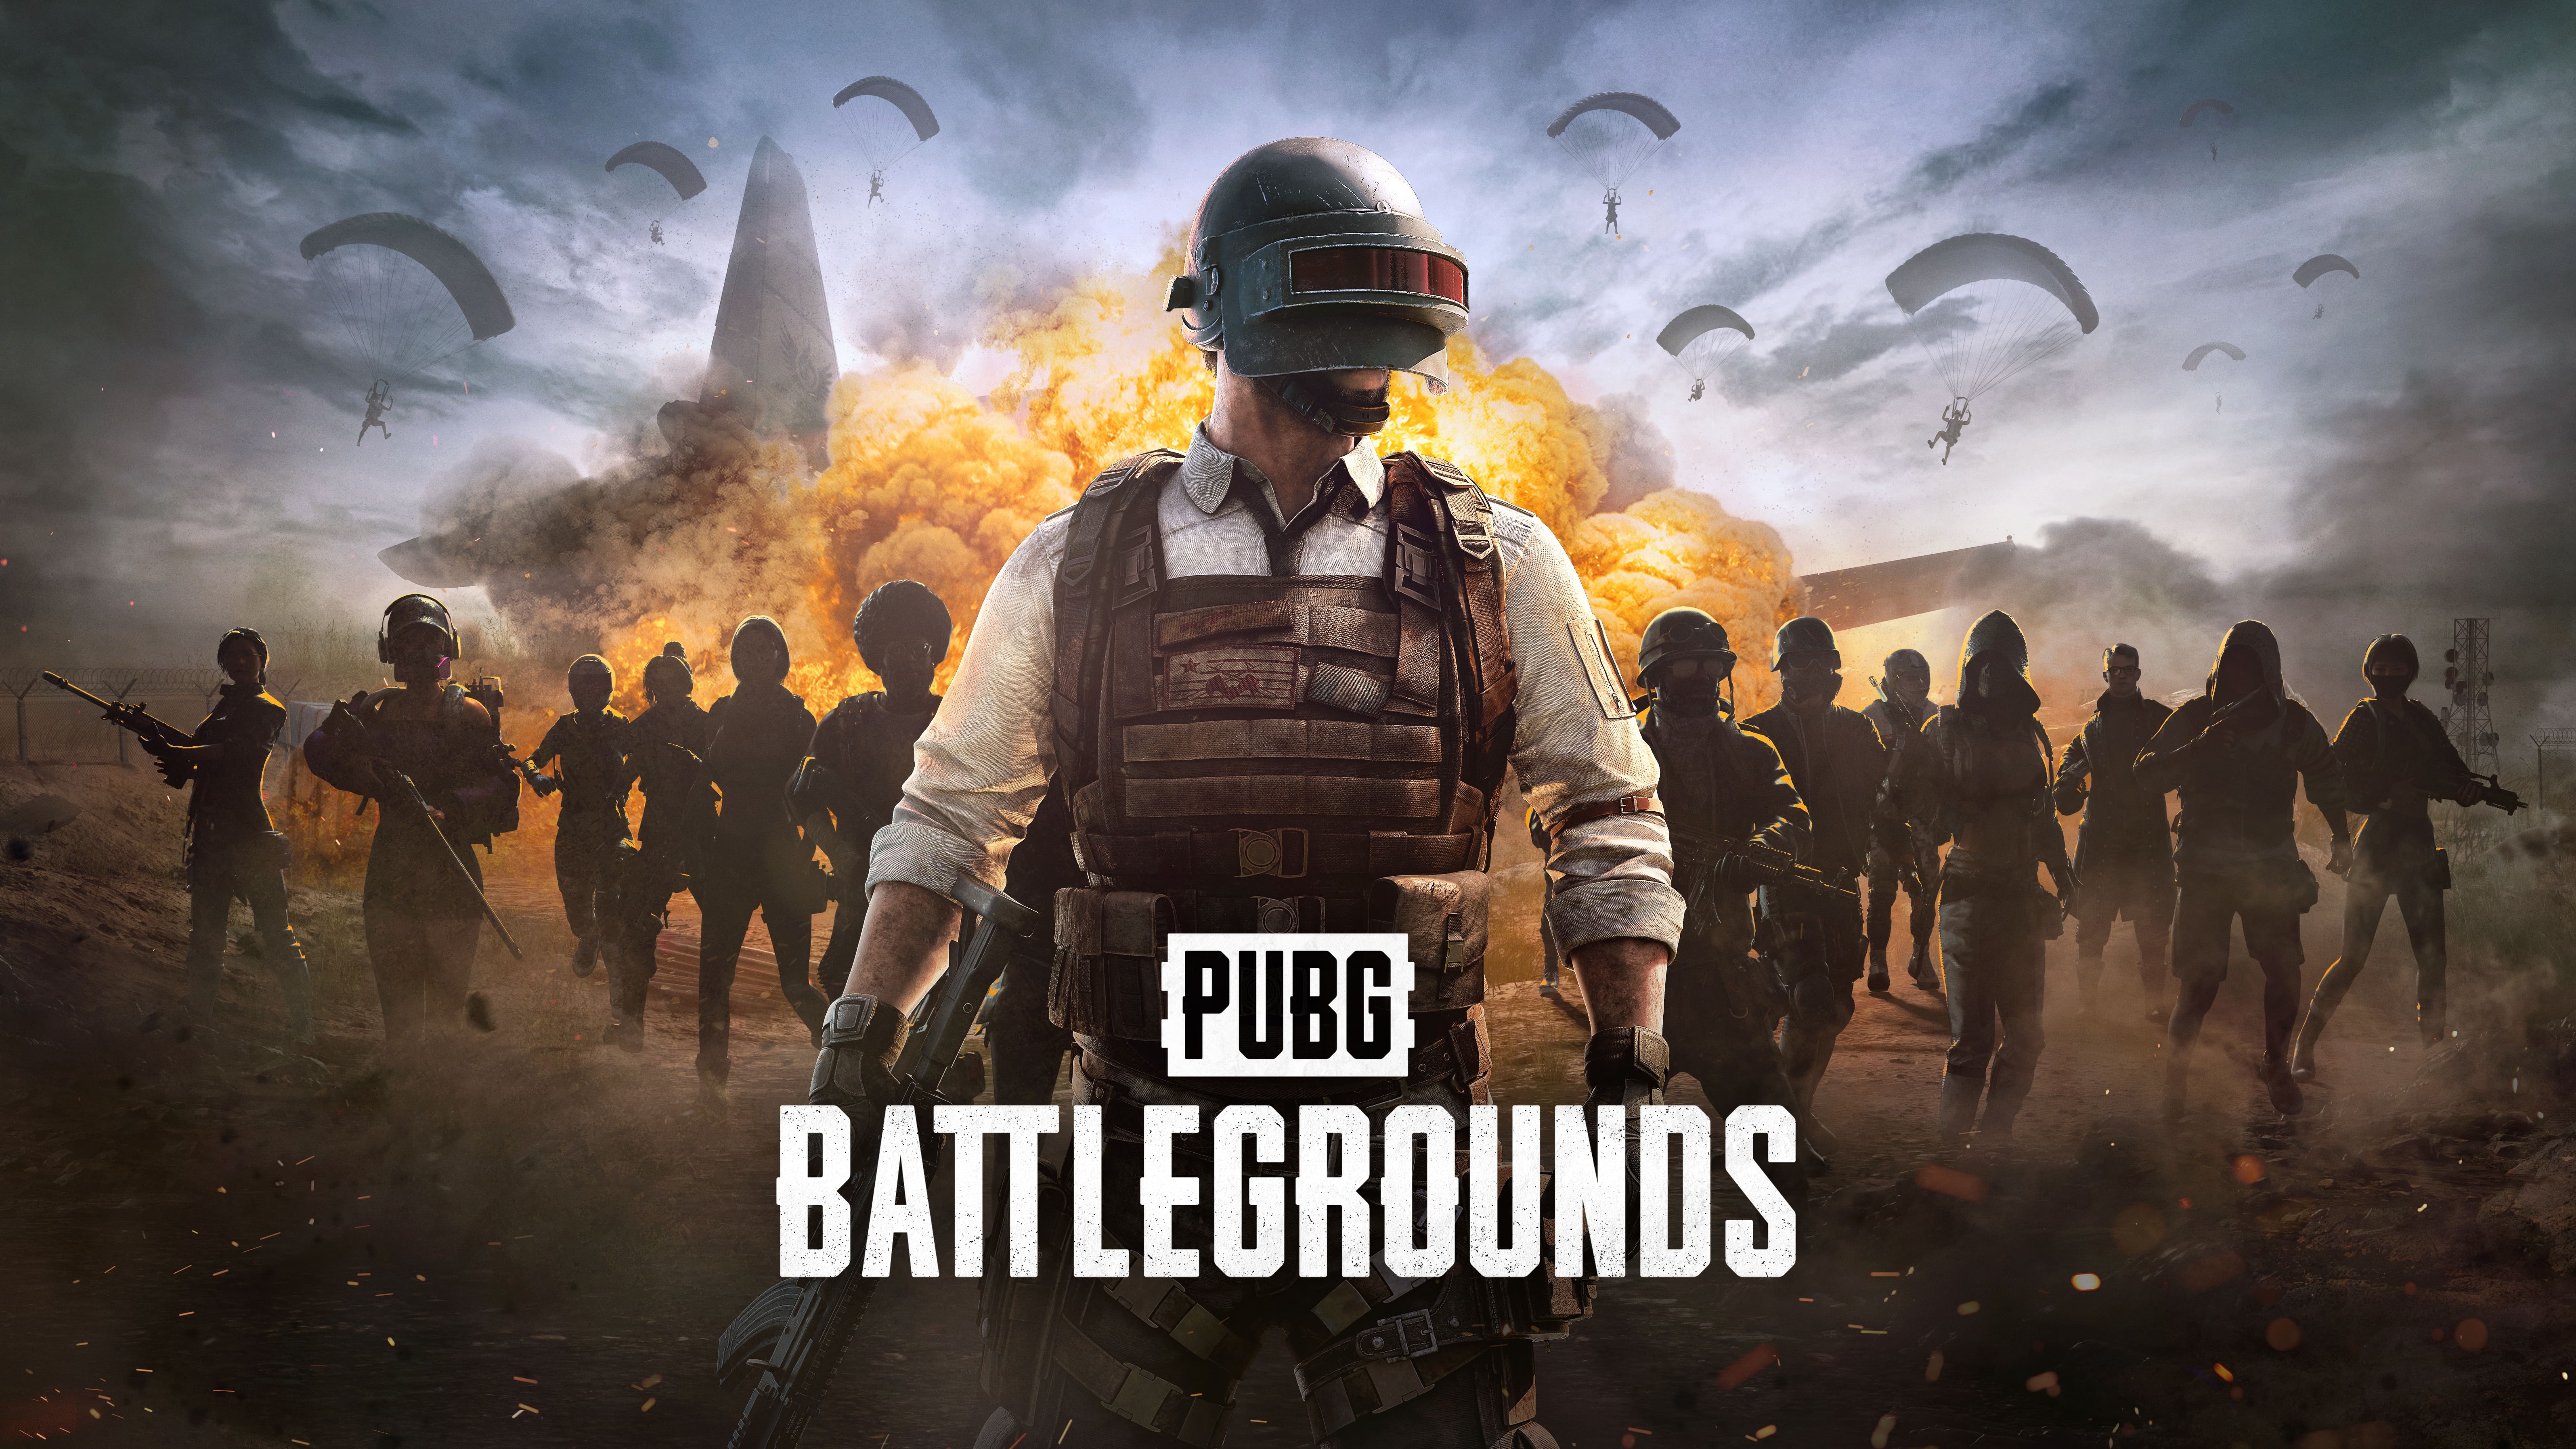 1920x10802022 PUBG NEW STATE 4k 2022 1920x10802022 Resolution Wallpaper, HD  Games 4K Wallpapers, Images, Photos and Background - Wallpapers Den